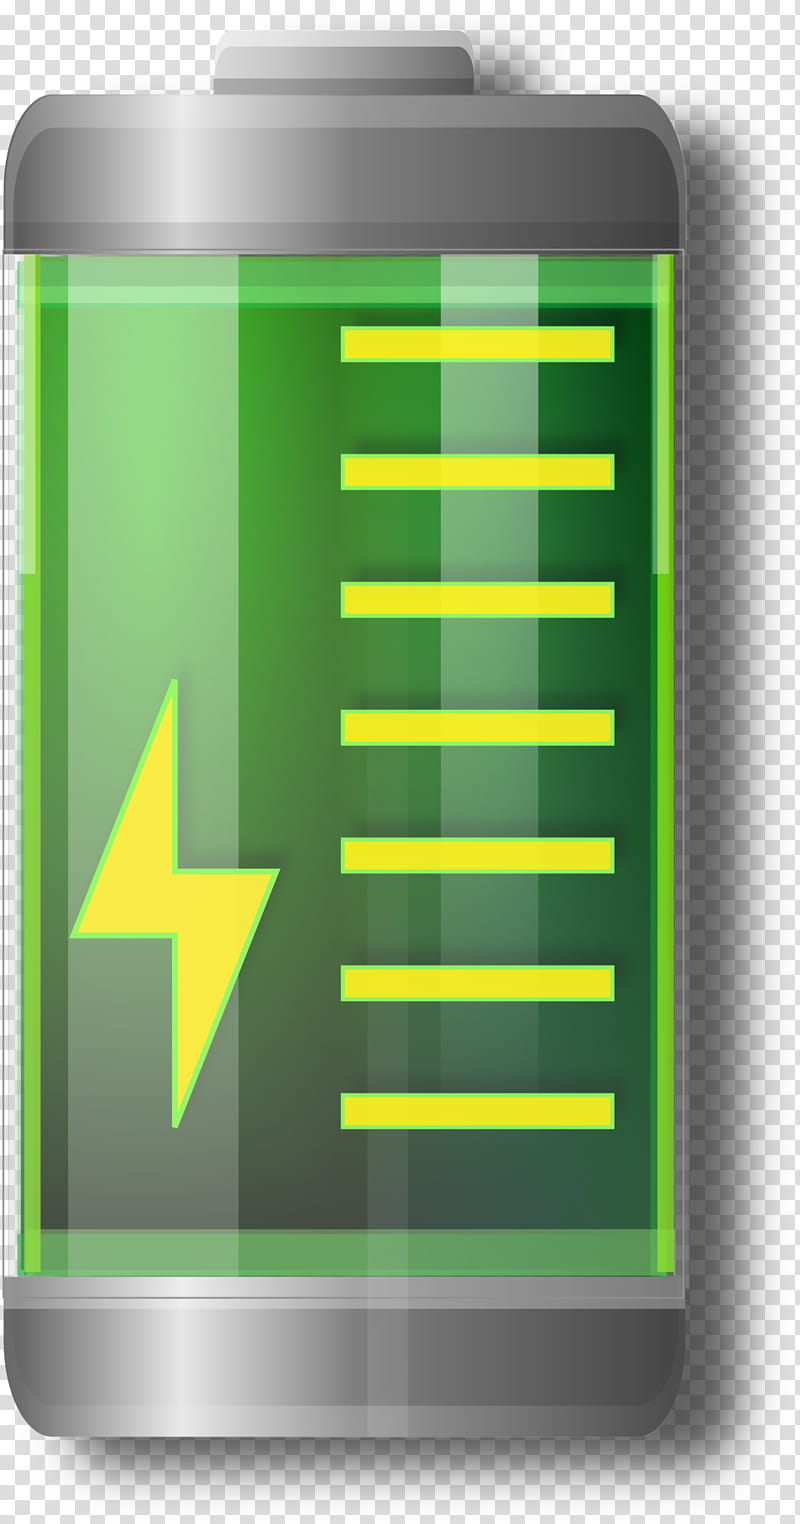 Reset Icon, Battery Charger, Electric Battery, Mobile Phones, Battery Indicator, Smartphone, Android, Flexible Battery transparent background PNG clipart